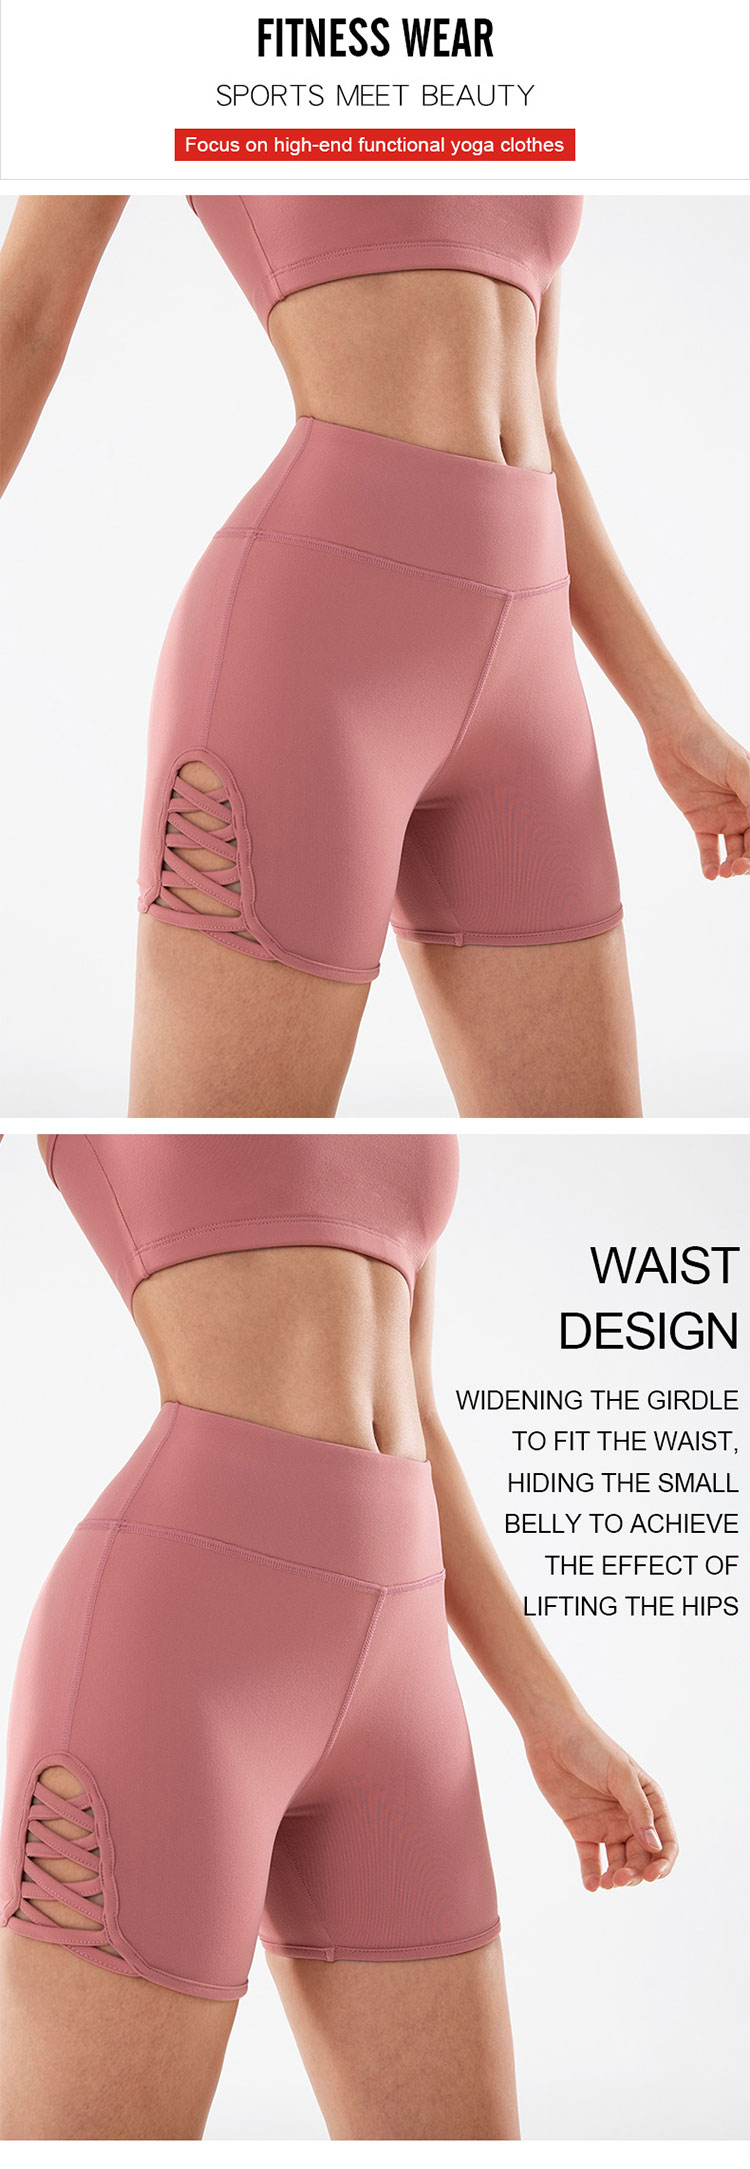 Primitive-fitness-methods-such-as-high-waisted-running-tights-are-appearing-more-and-more-in-new-sports-groups